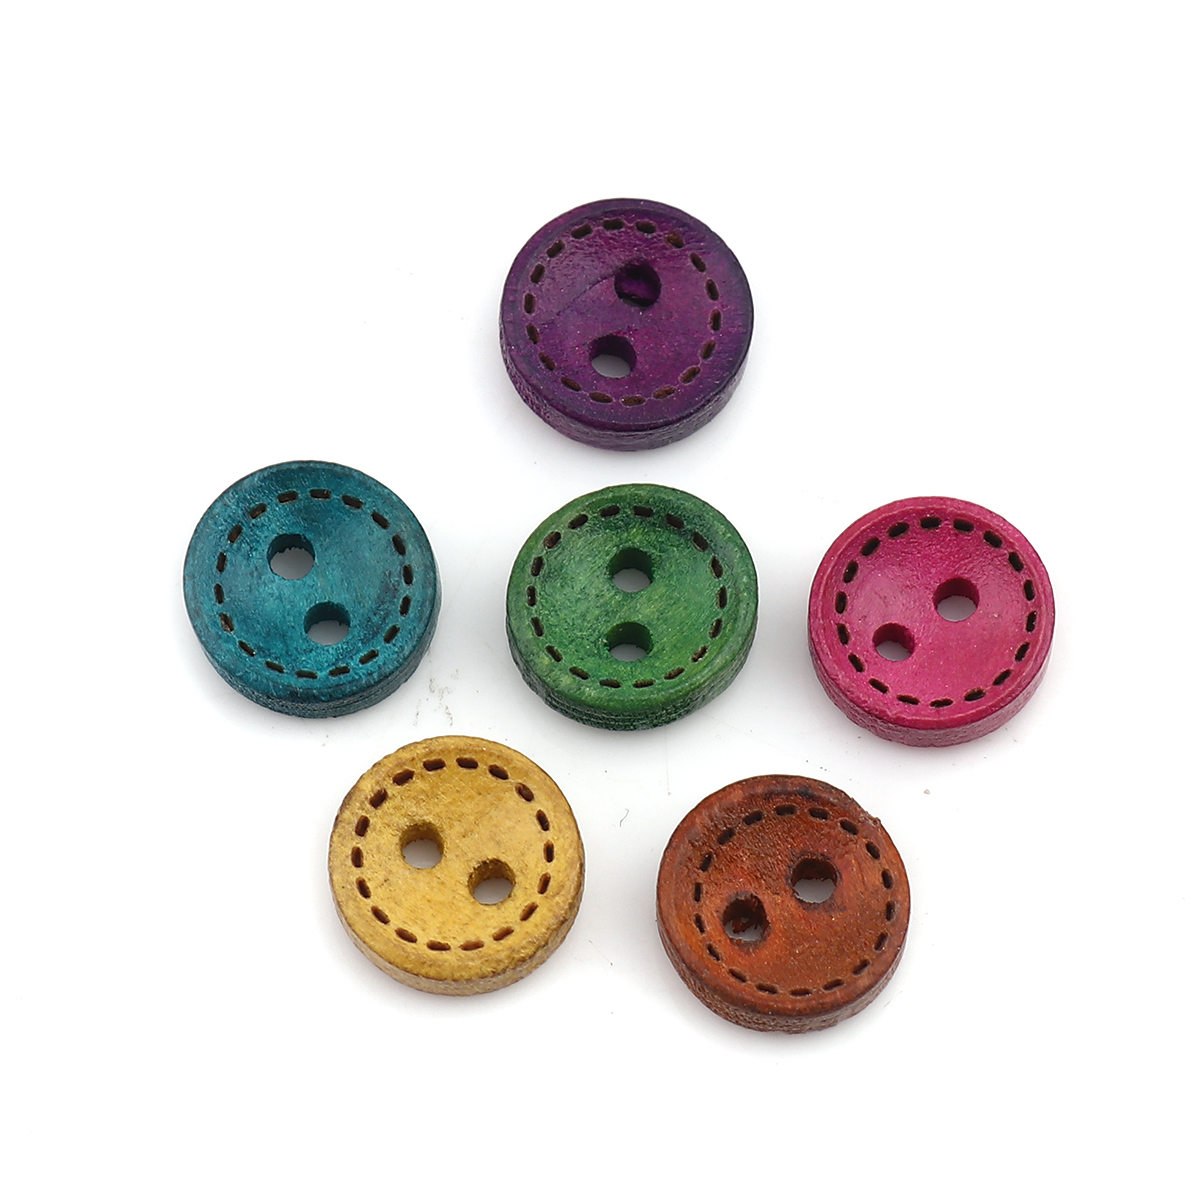 Picture of Wood Sewing Buttons Scrapbooking Two Holes Round At Random 10mm Dia., 200 PCs